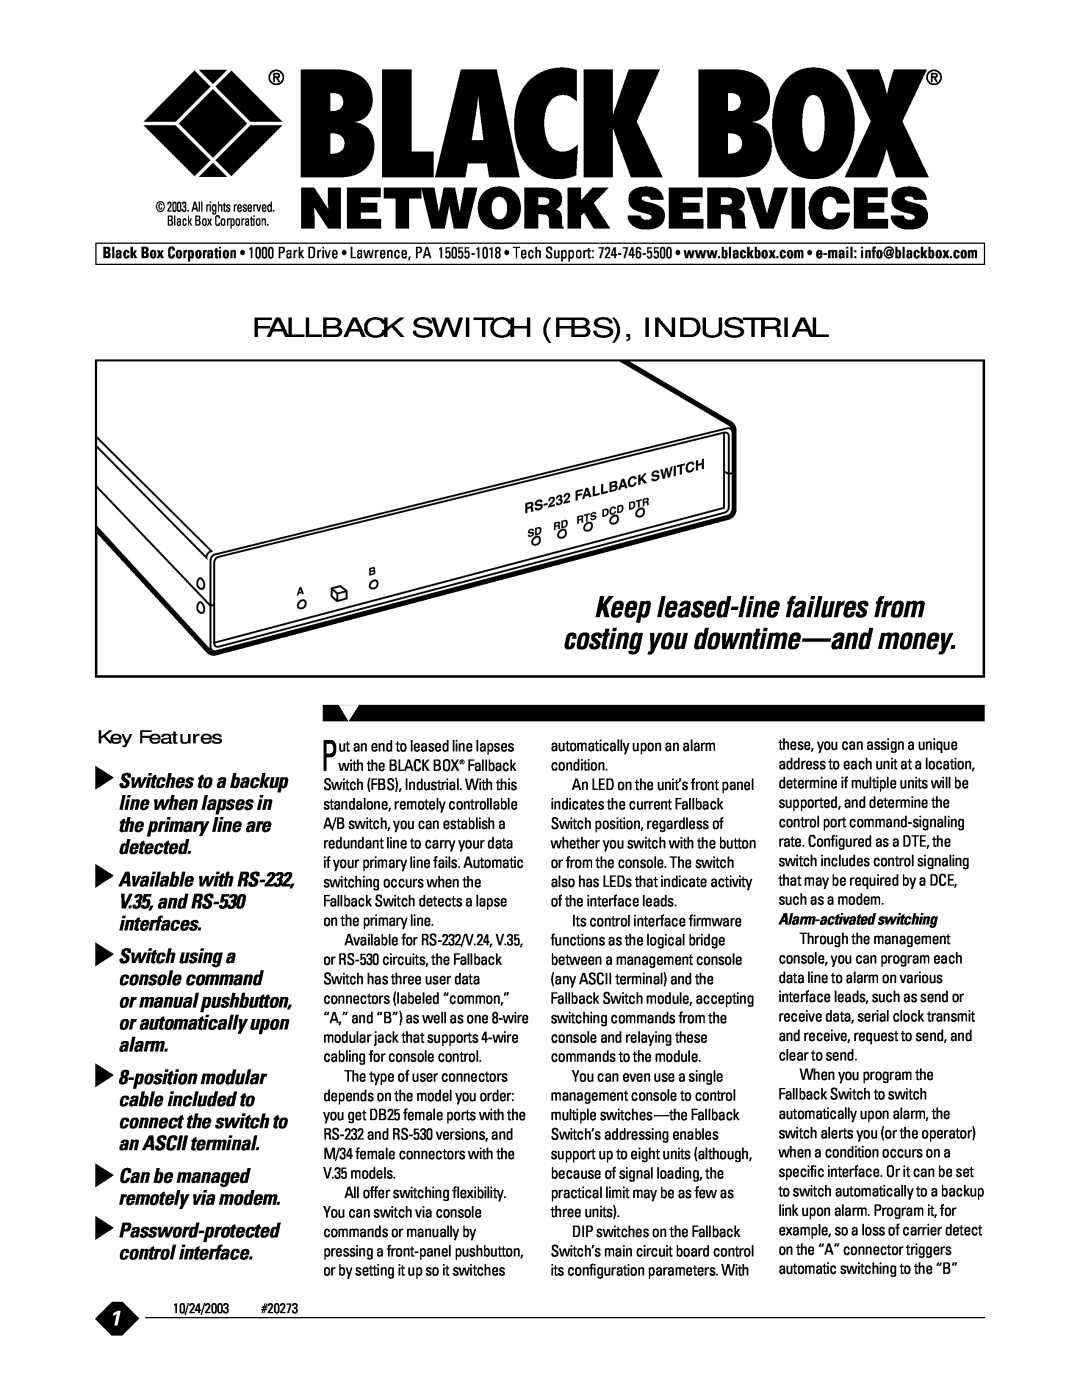 Black Box manual NOTE Must be used in pairs, V.35 2-WIRE SHORT-HAUL MODEM, Key Features, For sending sync or async data 